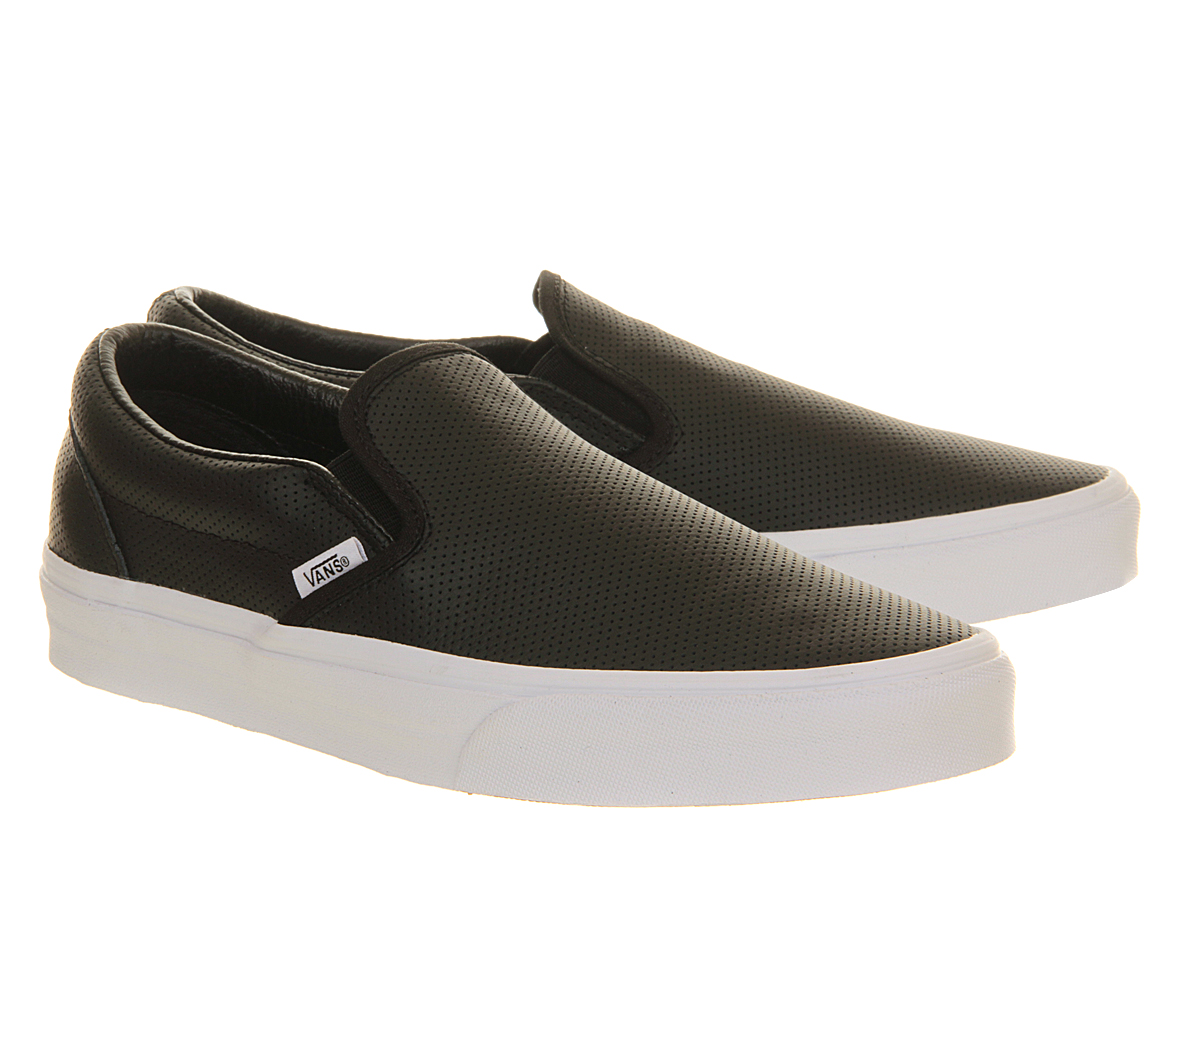 Vans Classic Slip On Shoes Black Perforated Leather - Unisex Sports